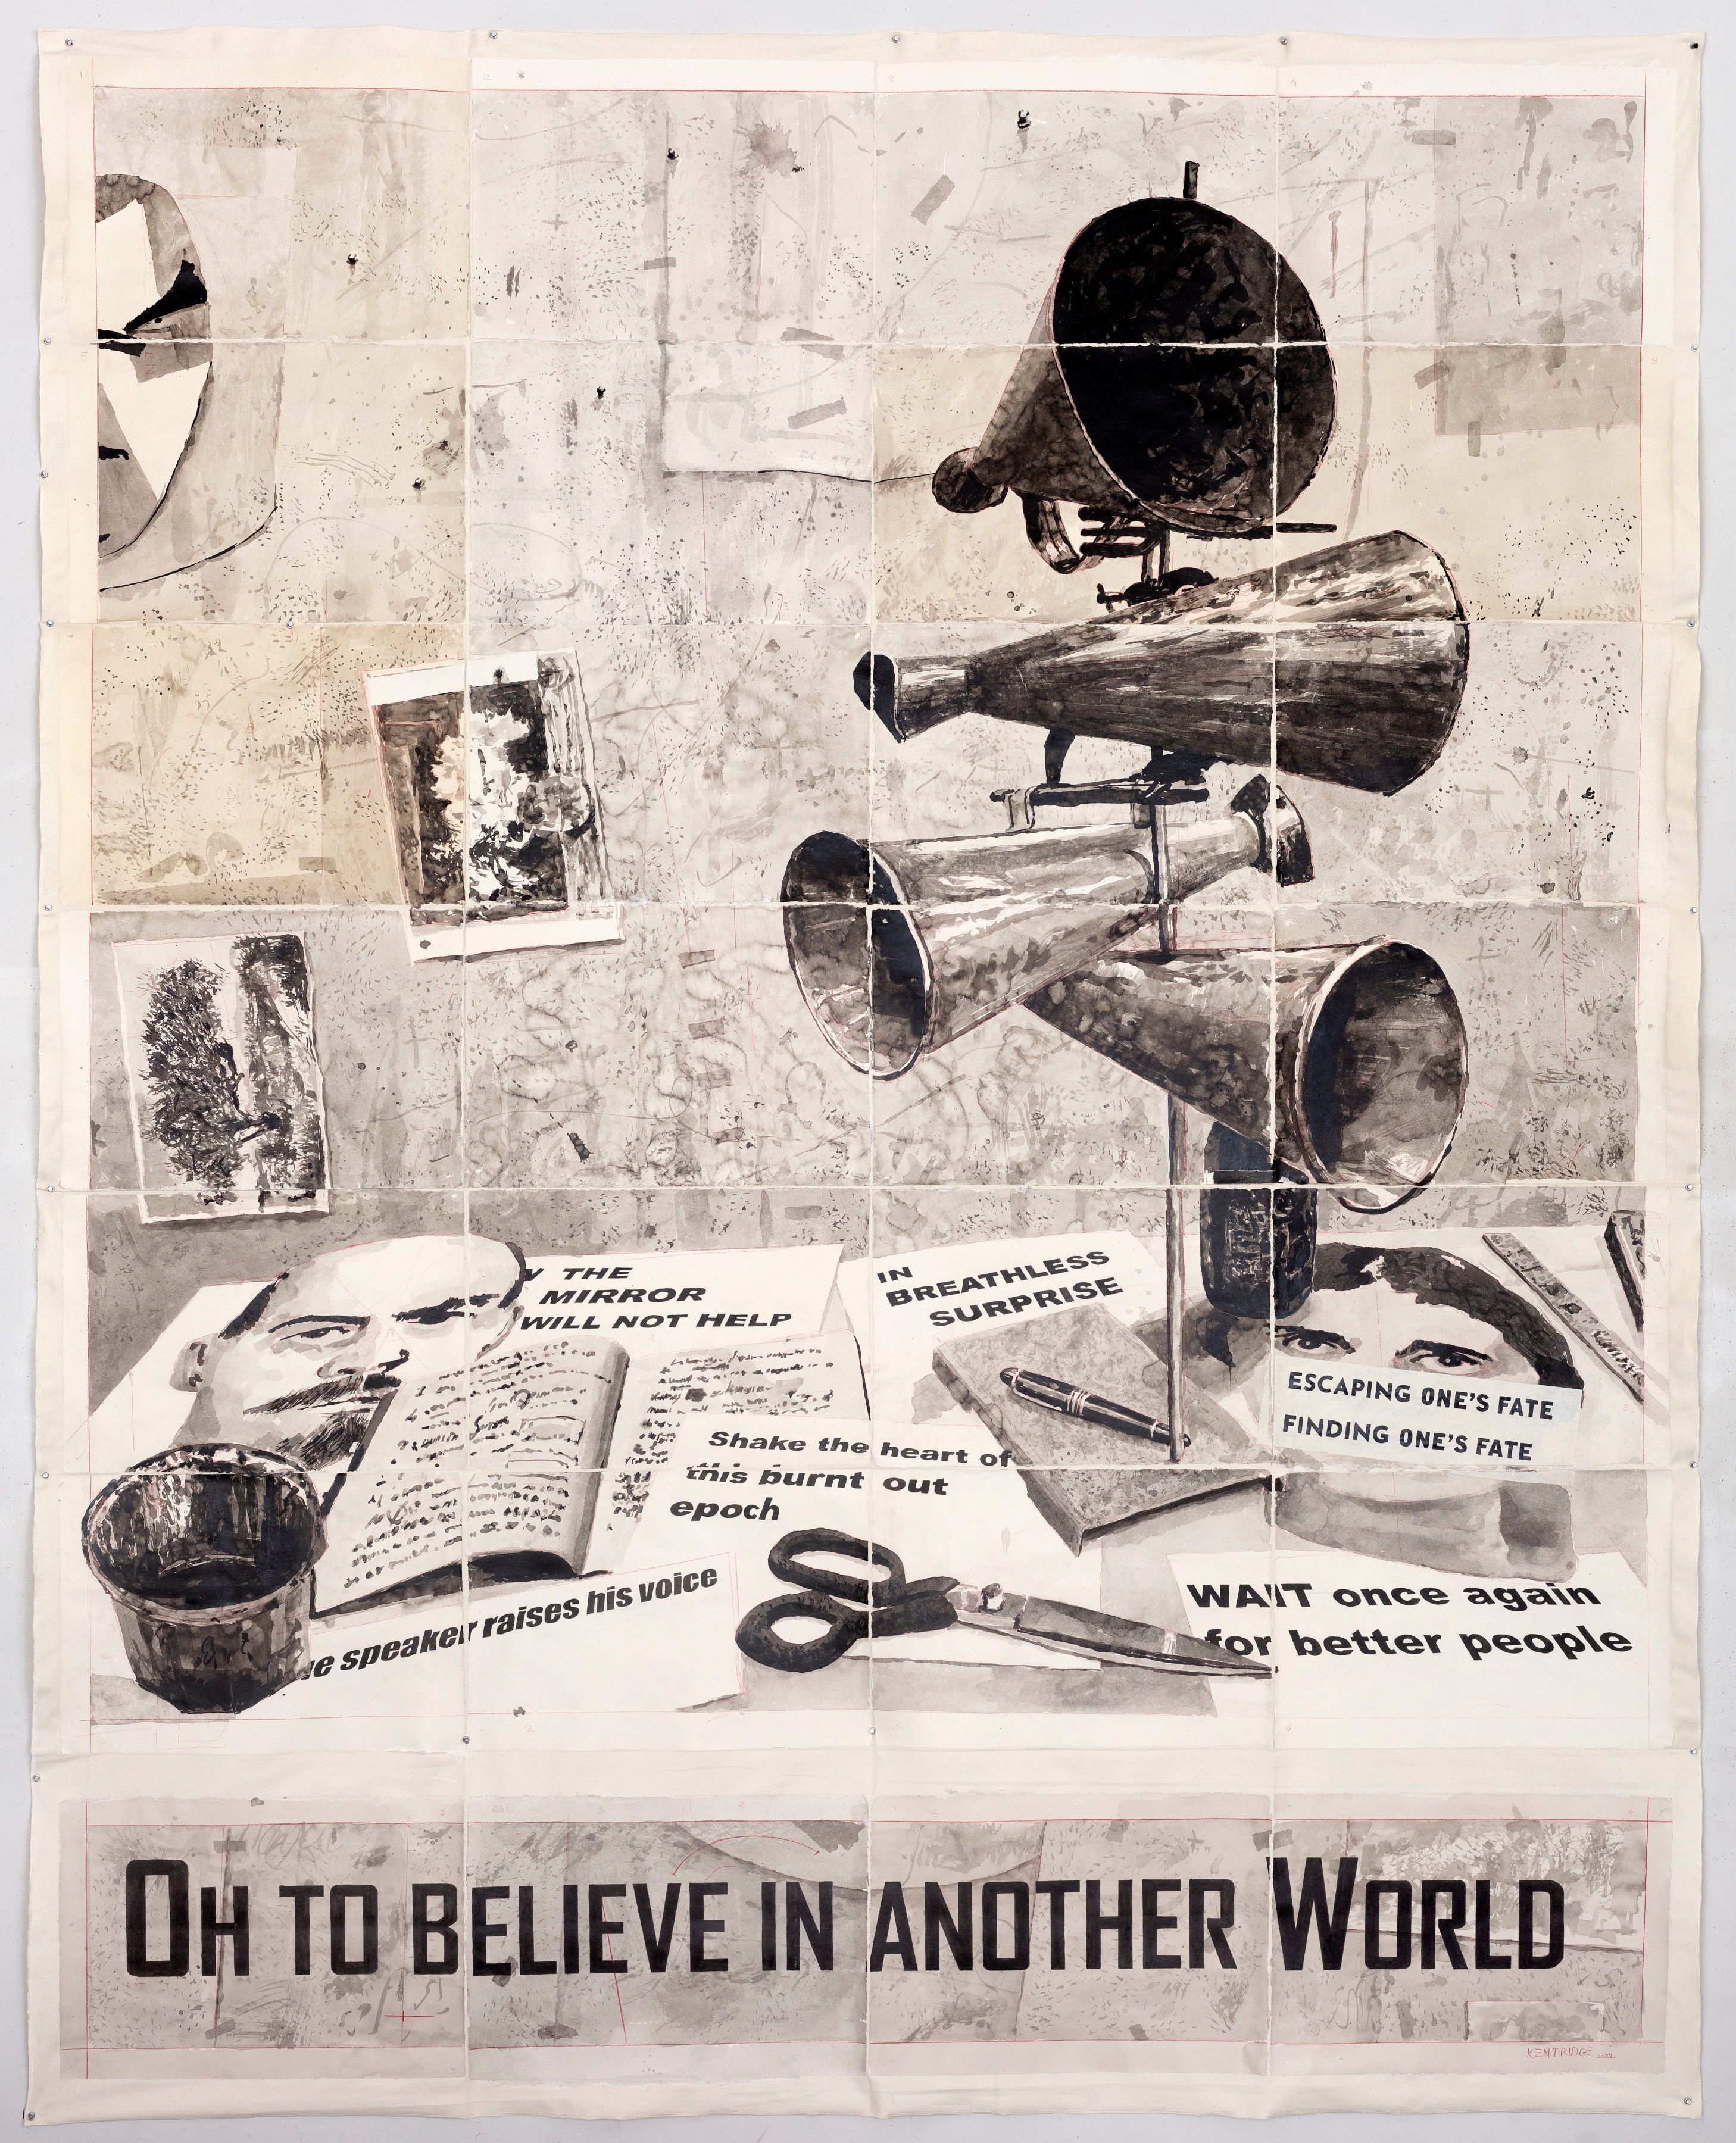 William Kentridge | Oh To Believe In Another World - Goodman Gallery London - Viewing Room - Goodman Gallery Viewing Room